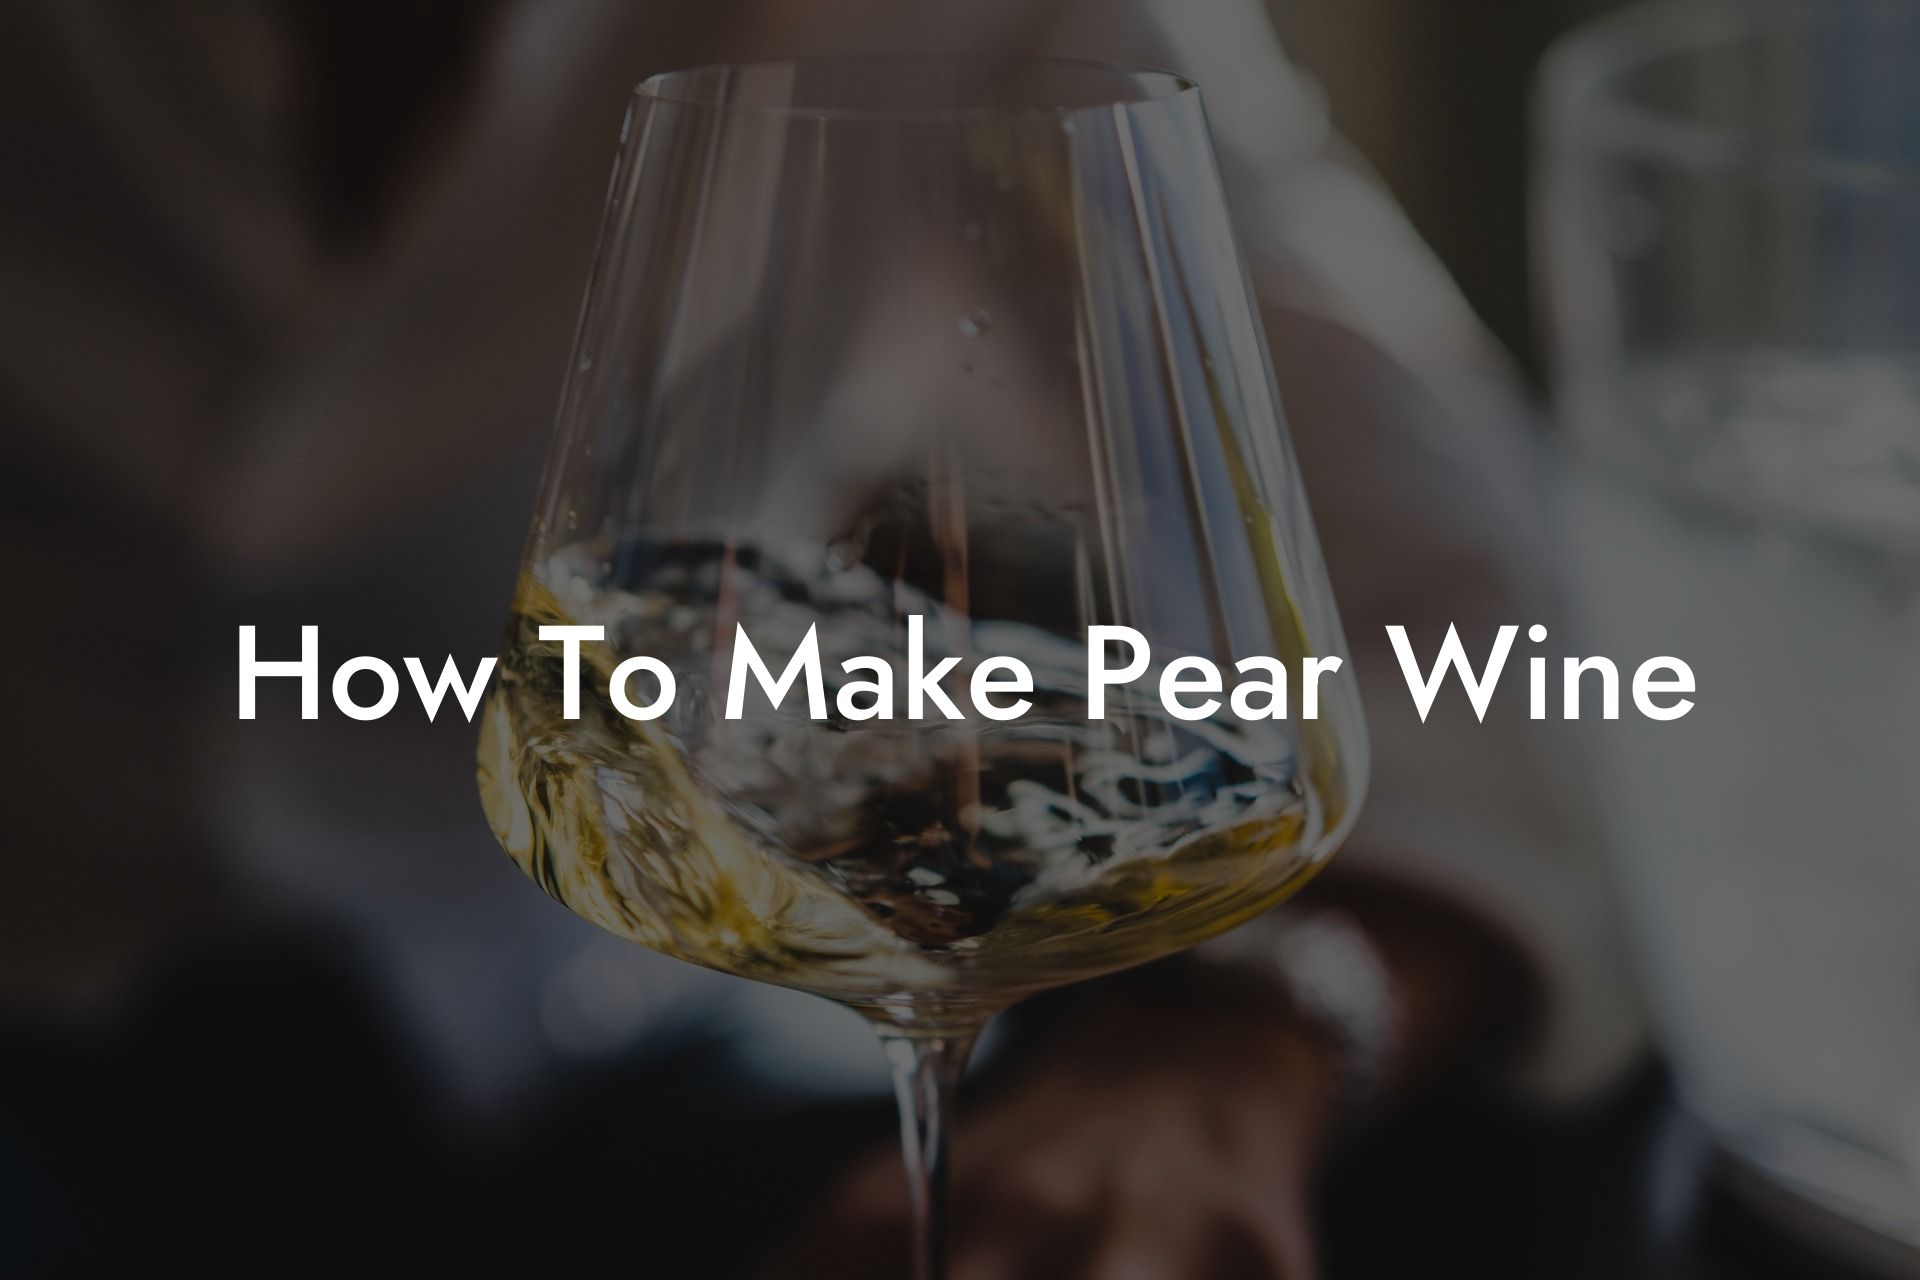 How To Make Pear Wine